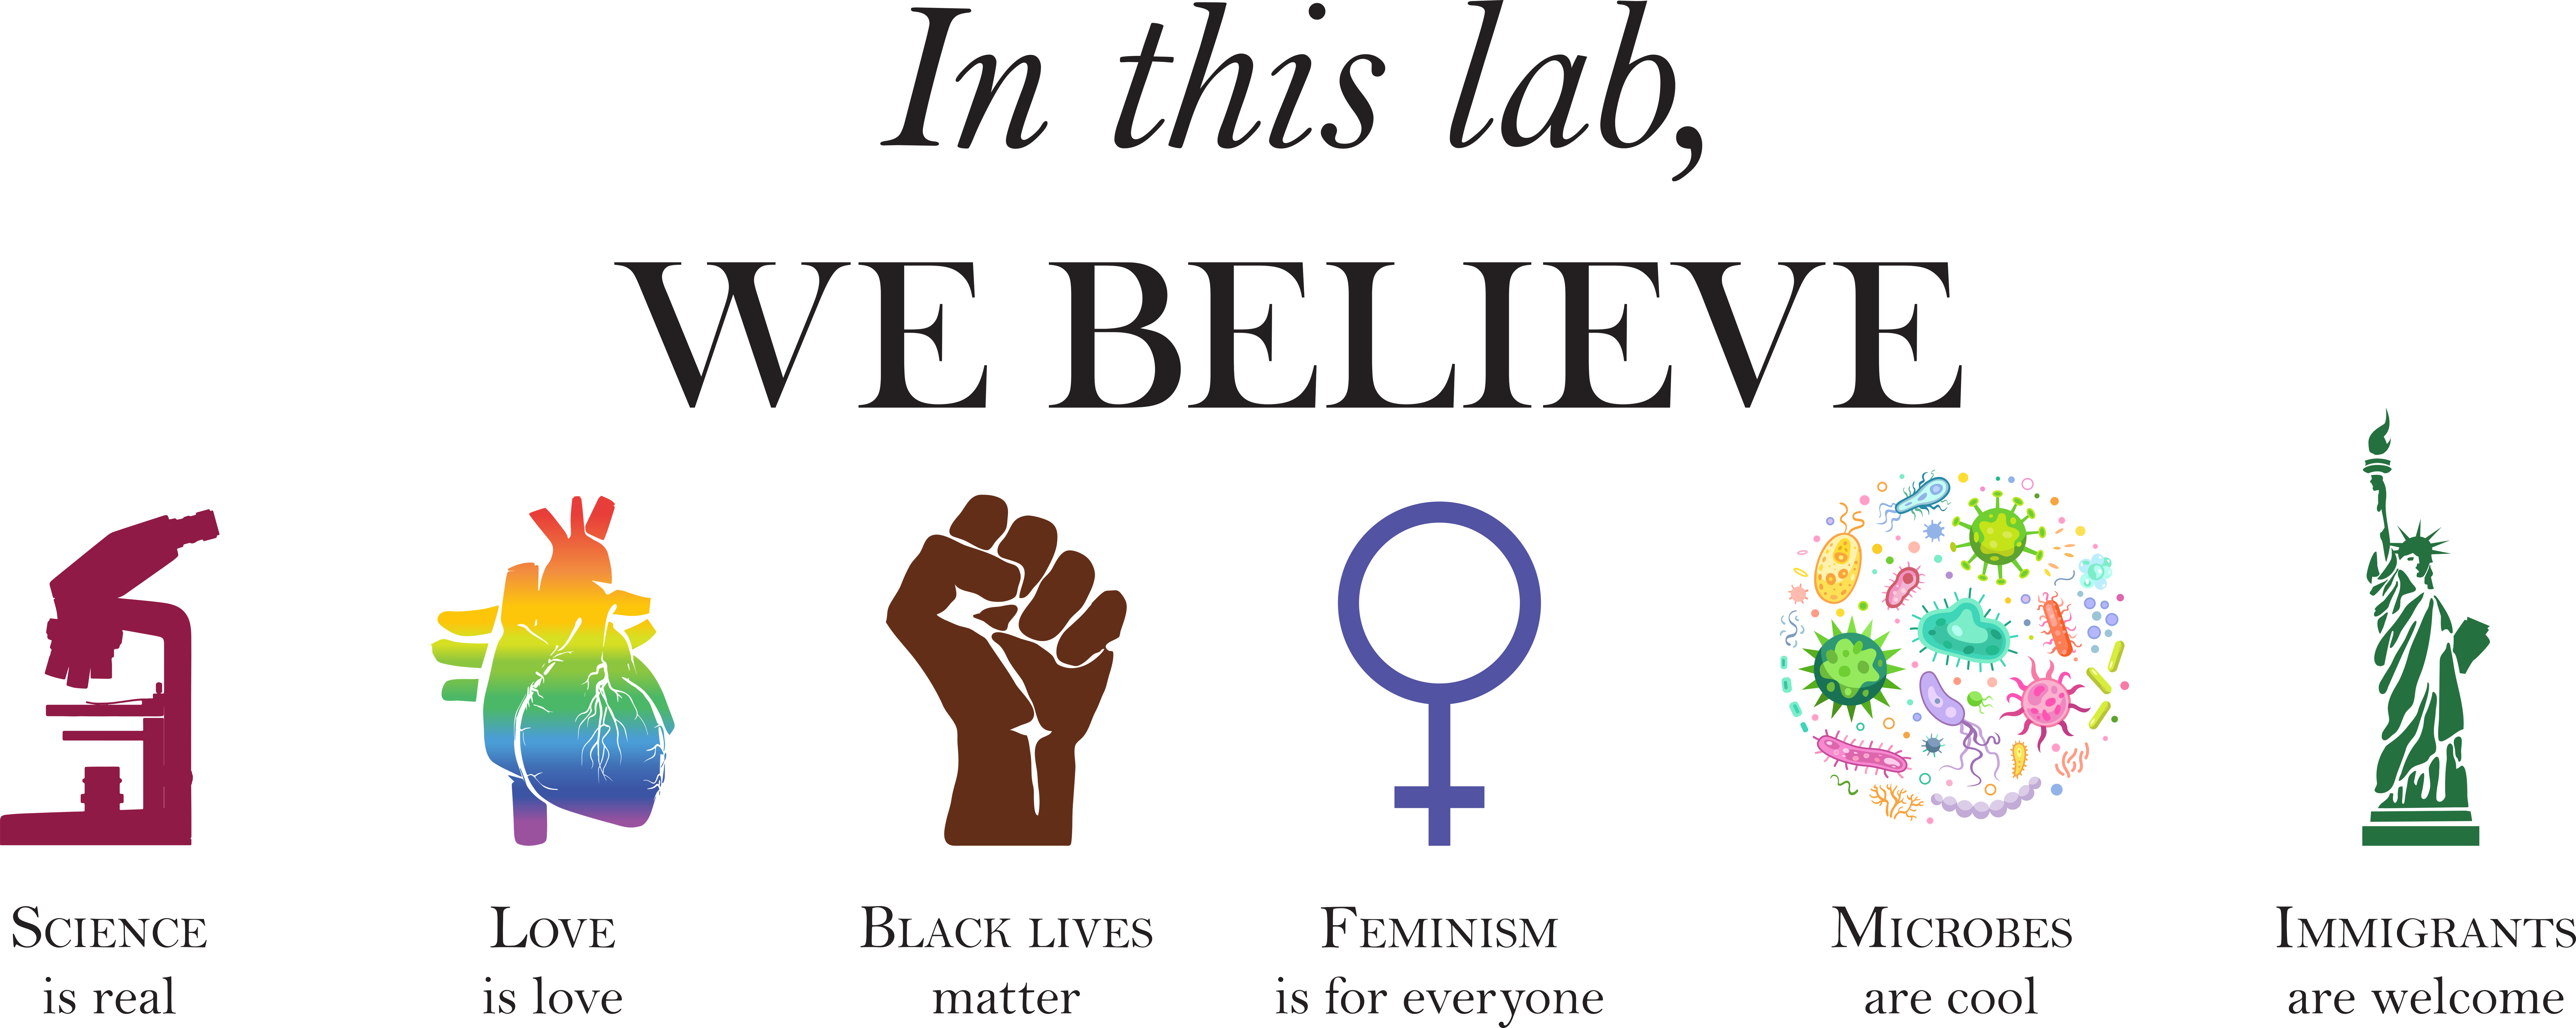 In this lab, we believe Science is real, Love is love, Black Lives Matter, Feminism if for everyone, Microbes are Cool, and Immigrants are welcome